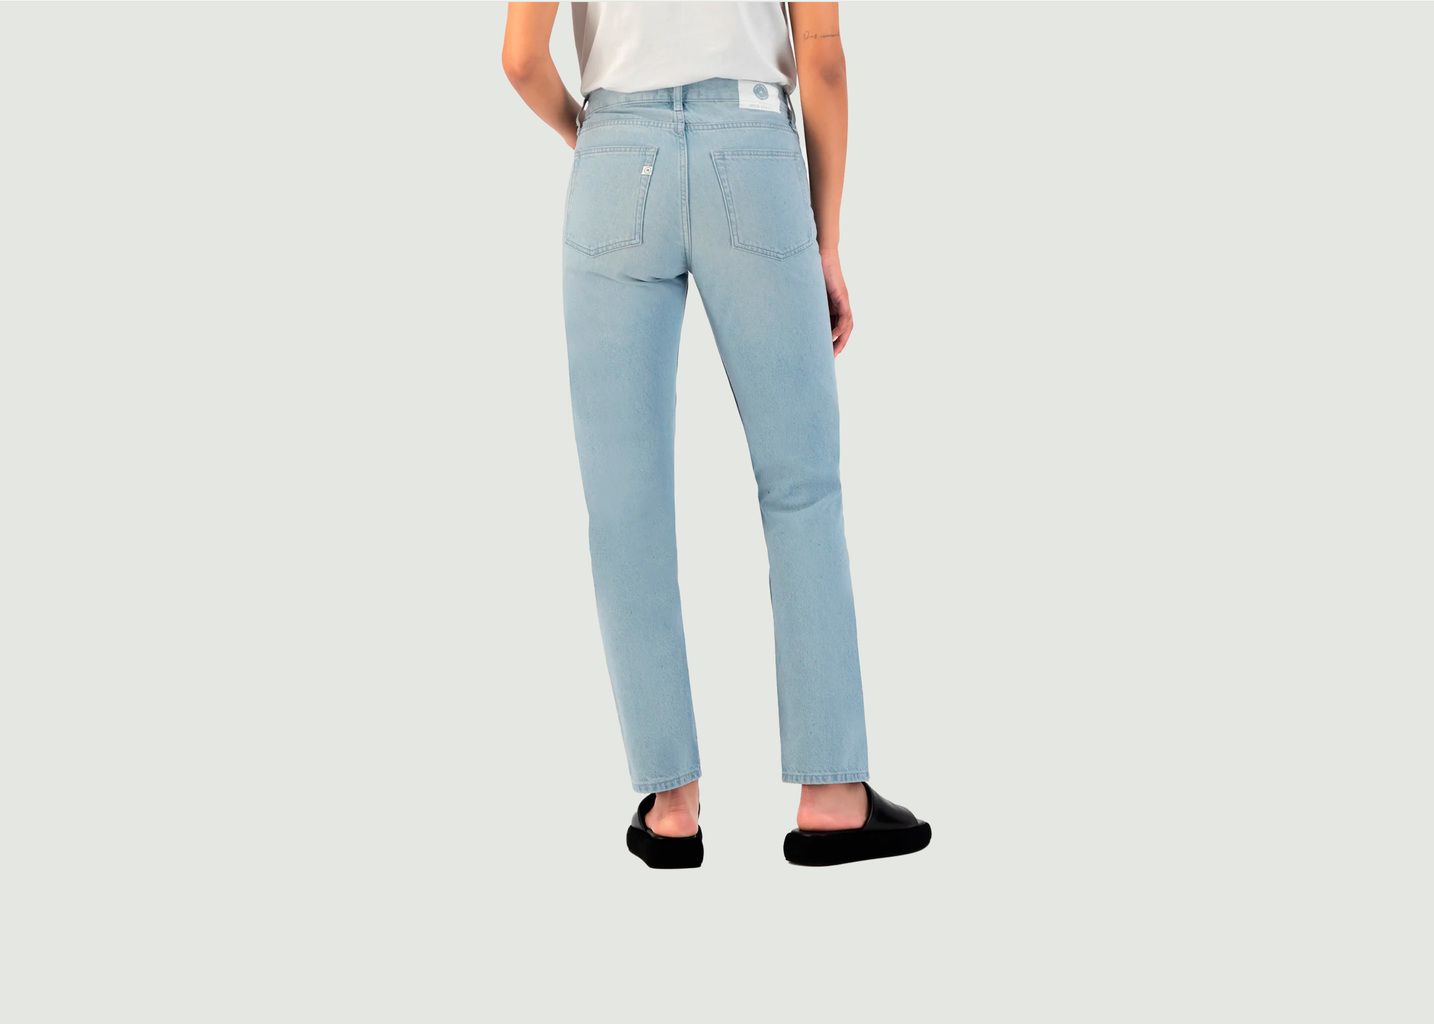 Easy Go jeans - Mud Jeans